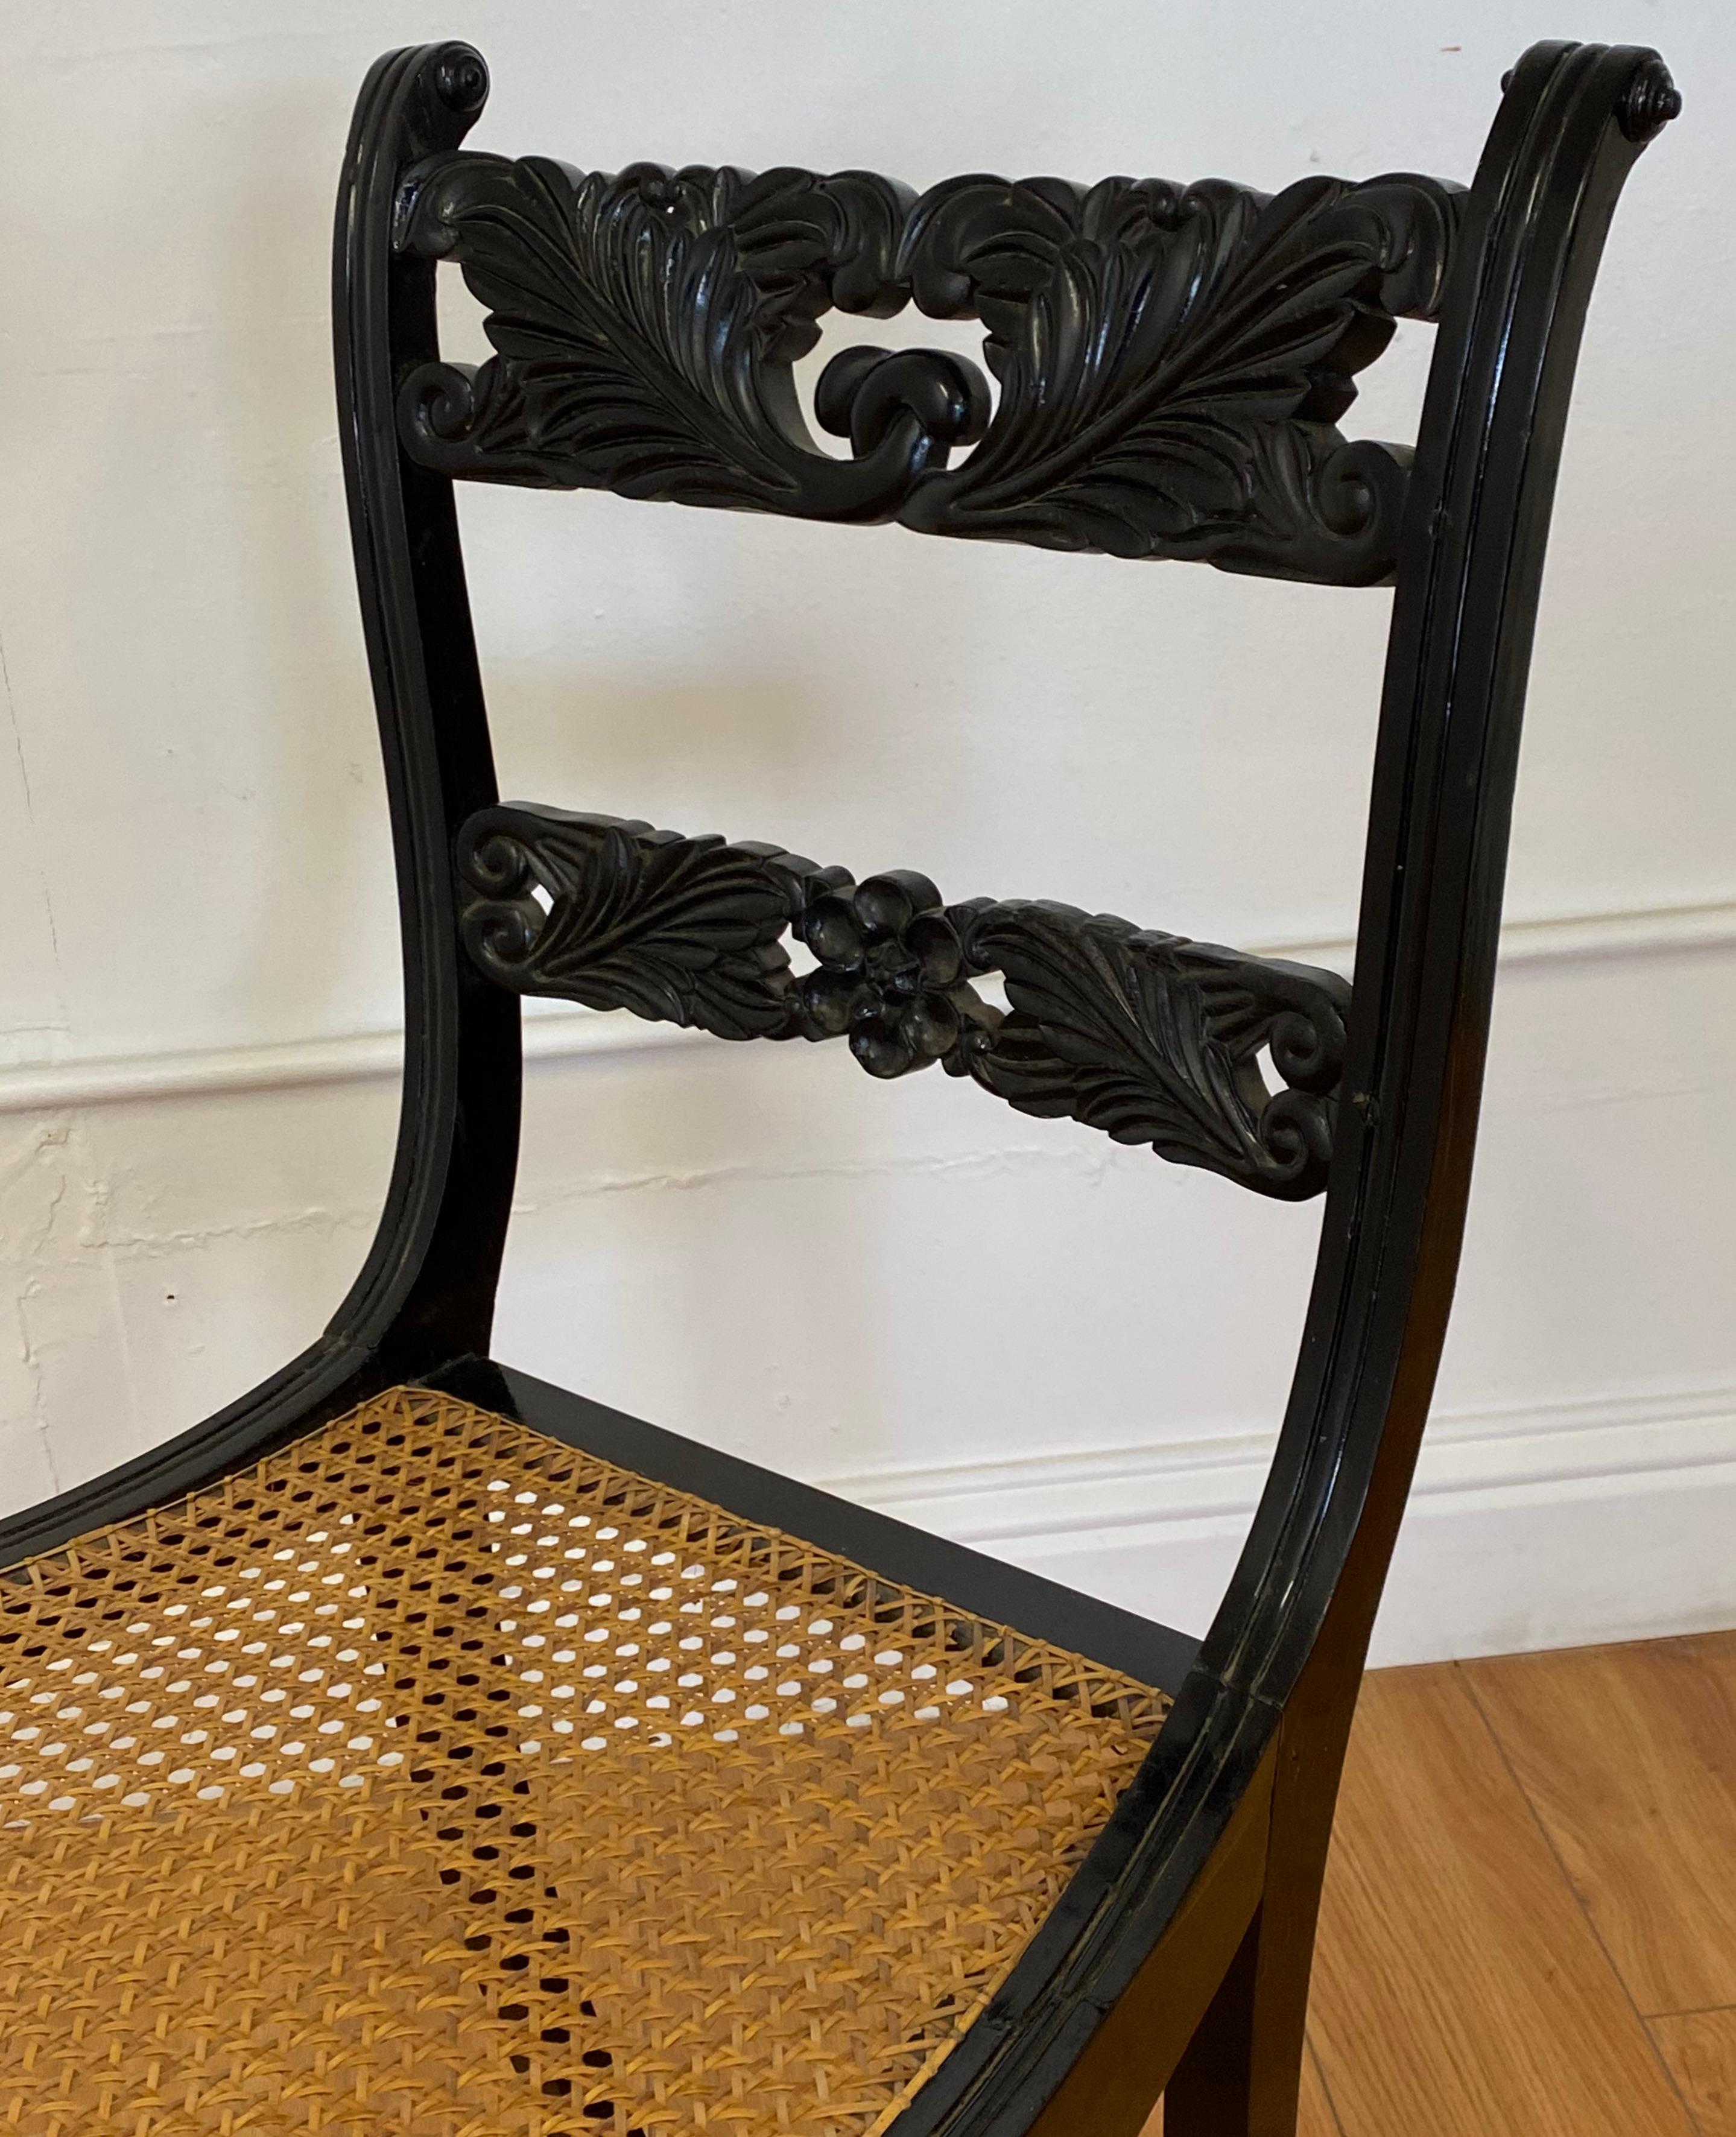 English 19th Century Trafalgar Upright Chair with Cane Seat & Floral Motif c.1830 For Sale